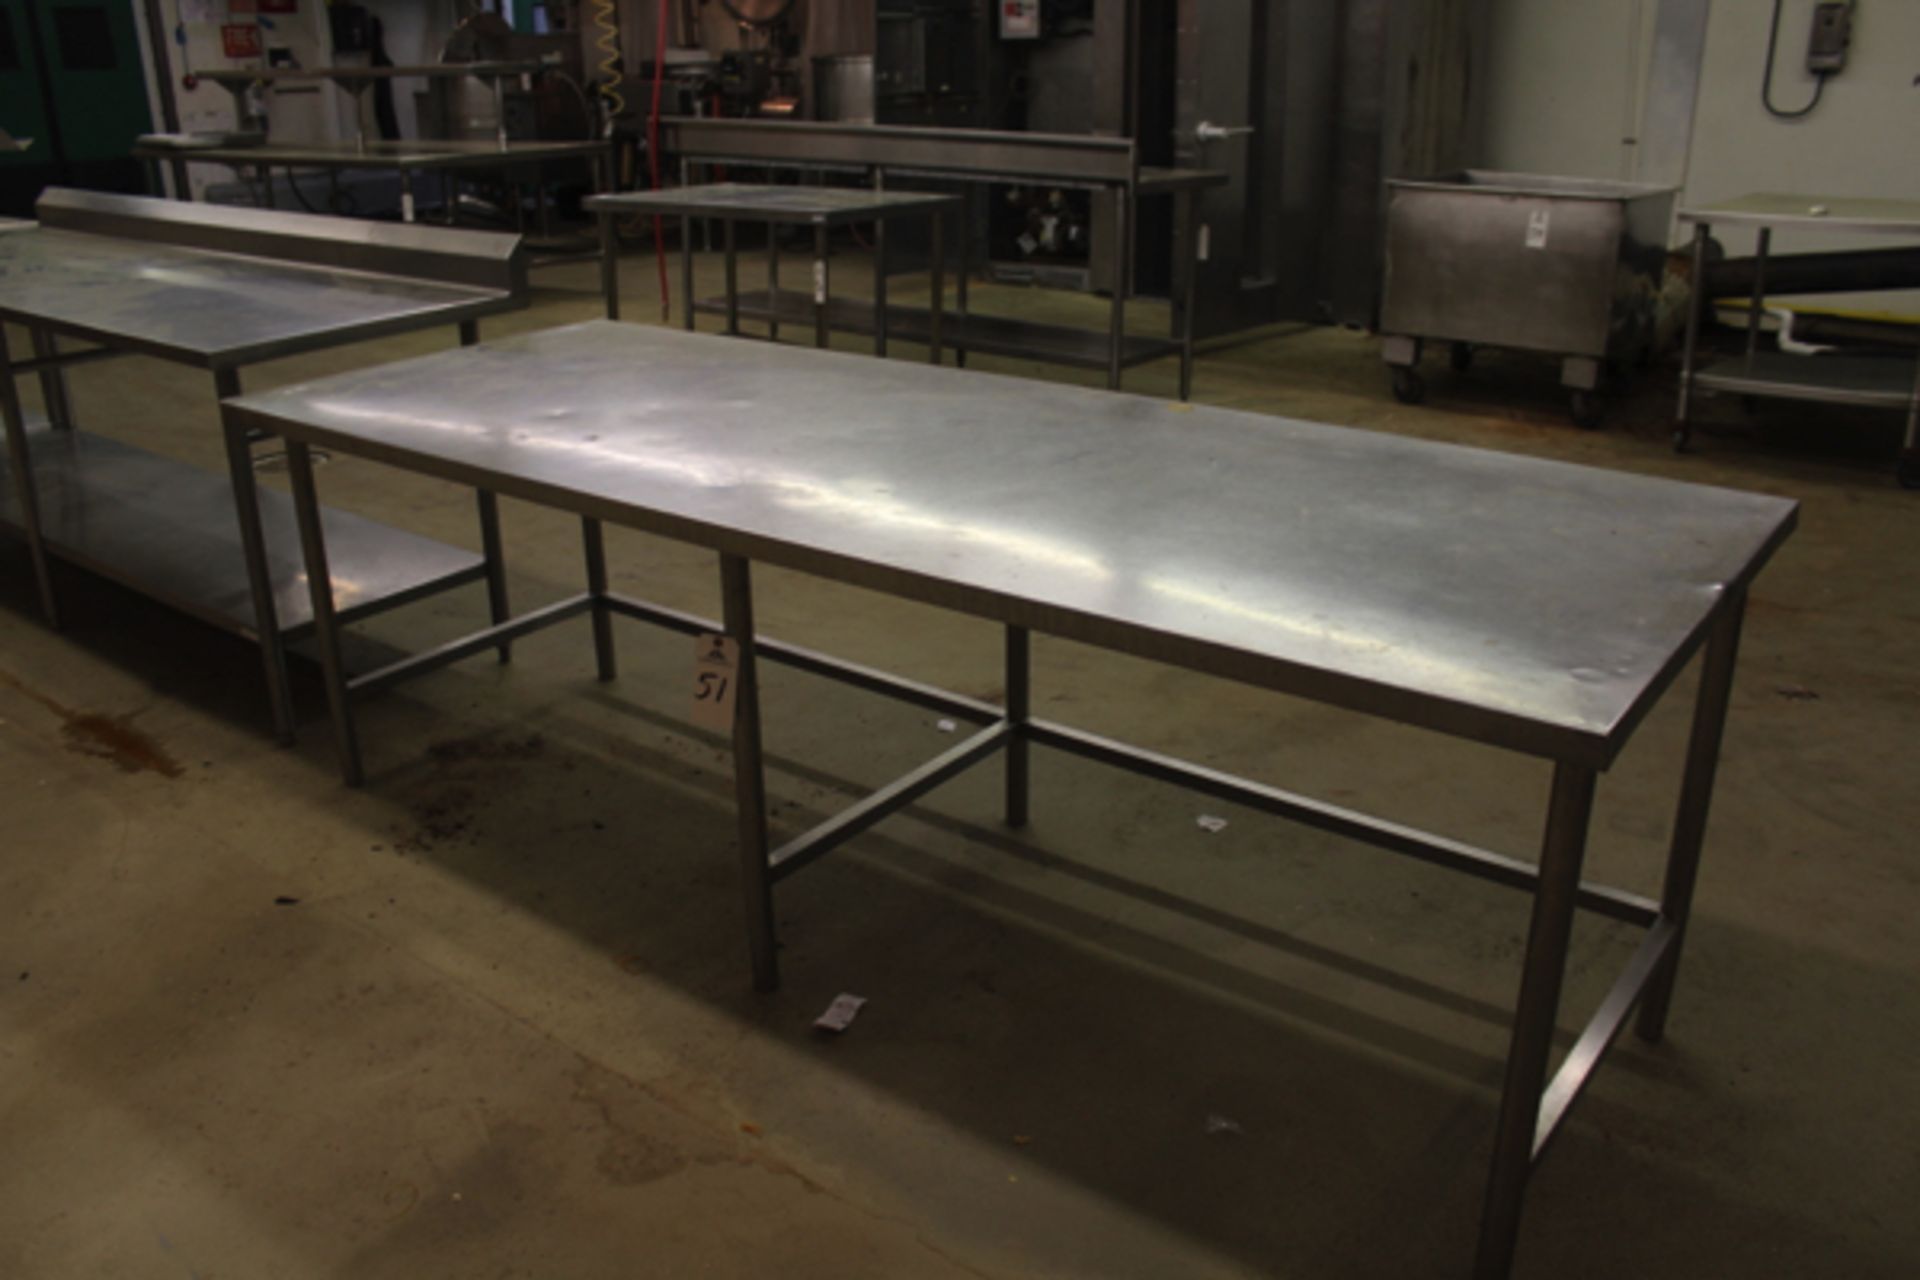 Stainless Steel Prep Table, 36" X 8' | Rigging Price: $25 or May Hand Carry